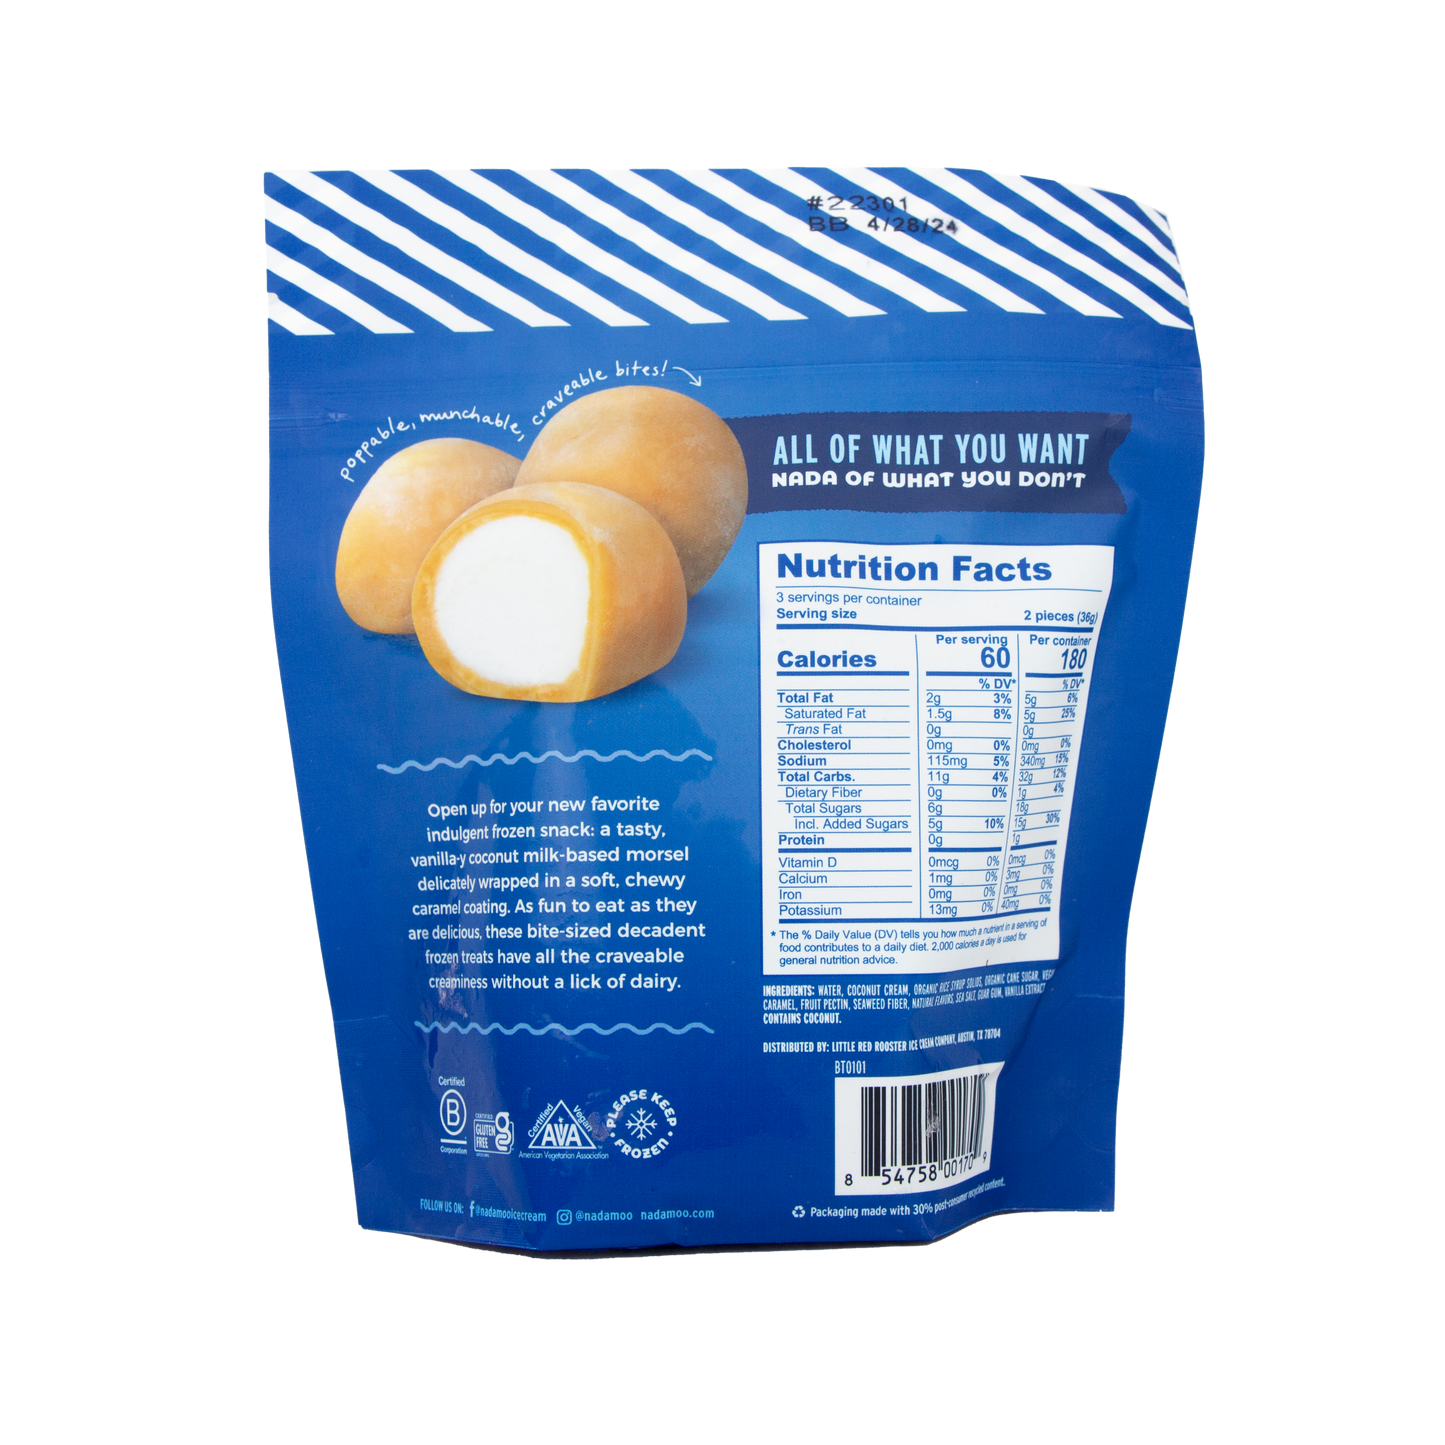 Nada Moo! - Frozen Snacks Bites Salted Caramel (Store Pick-Up Only)